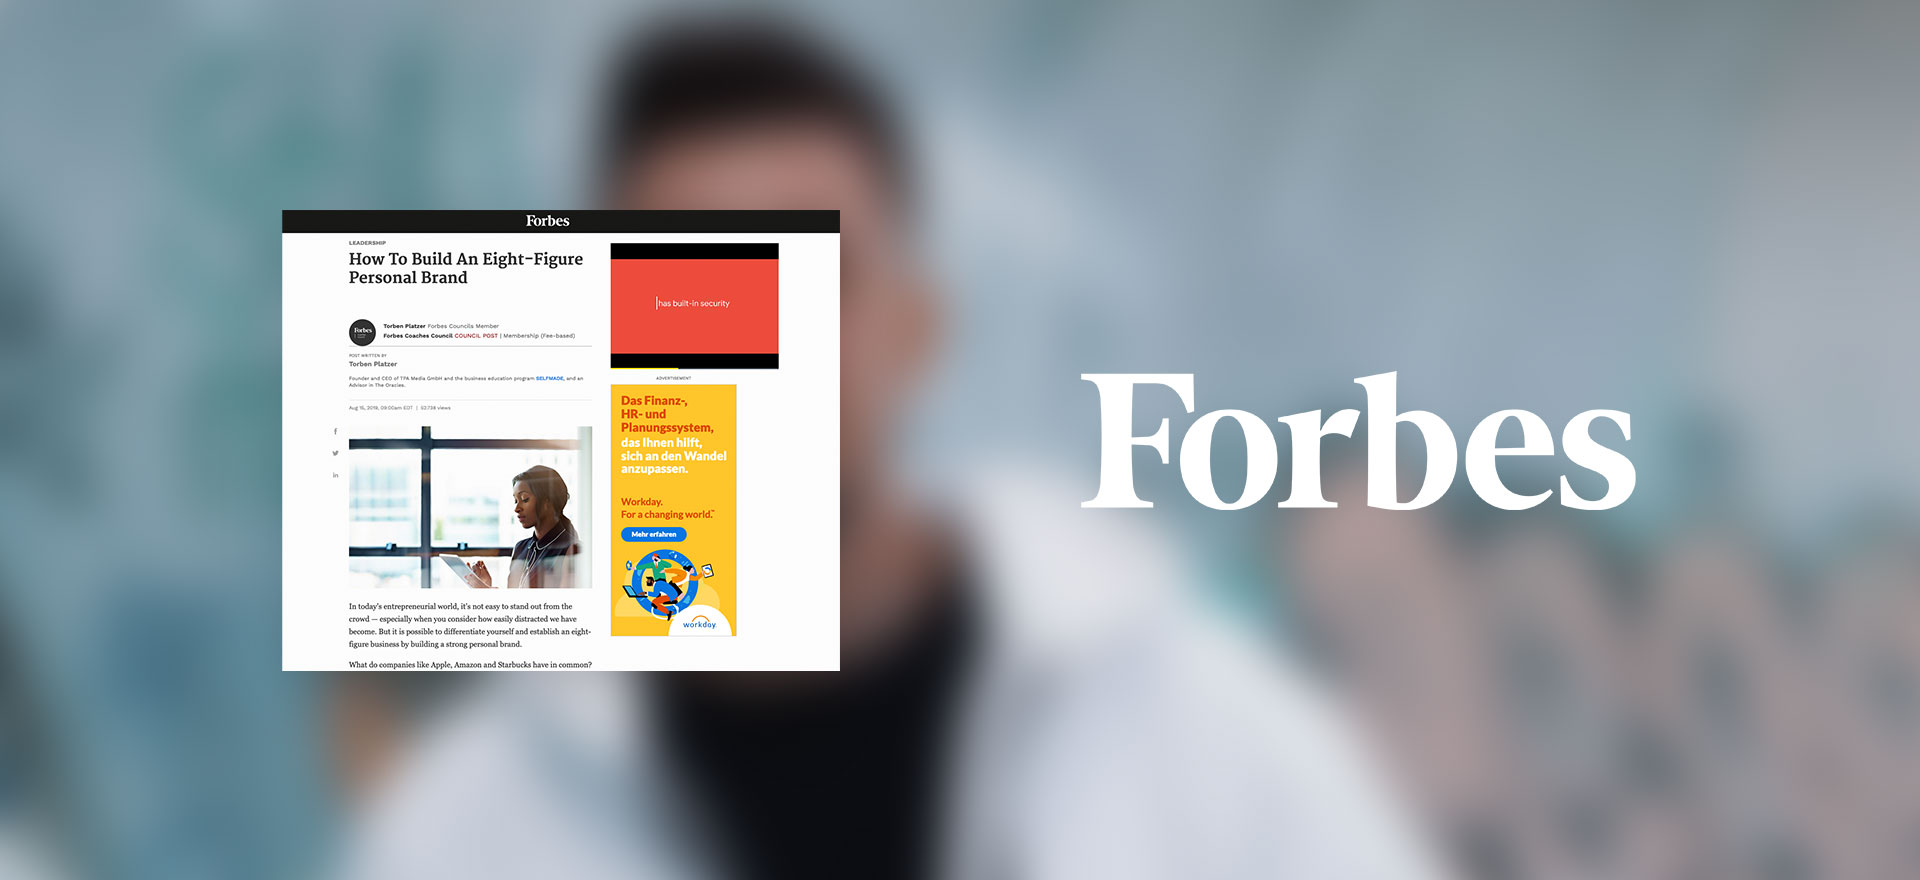 Torben ist offizielles Forbes Council Mitglied und Content Creator Of The Year.